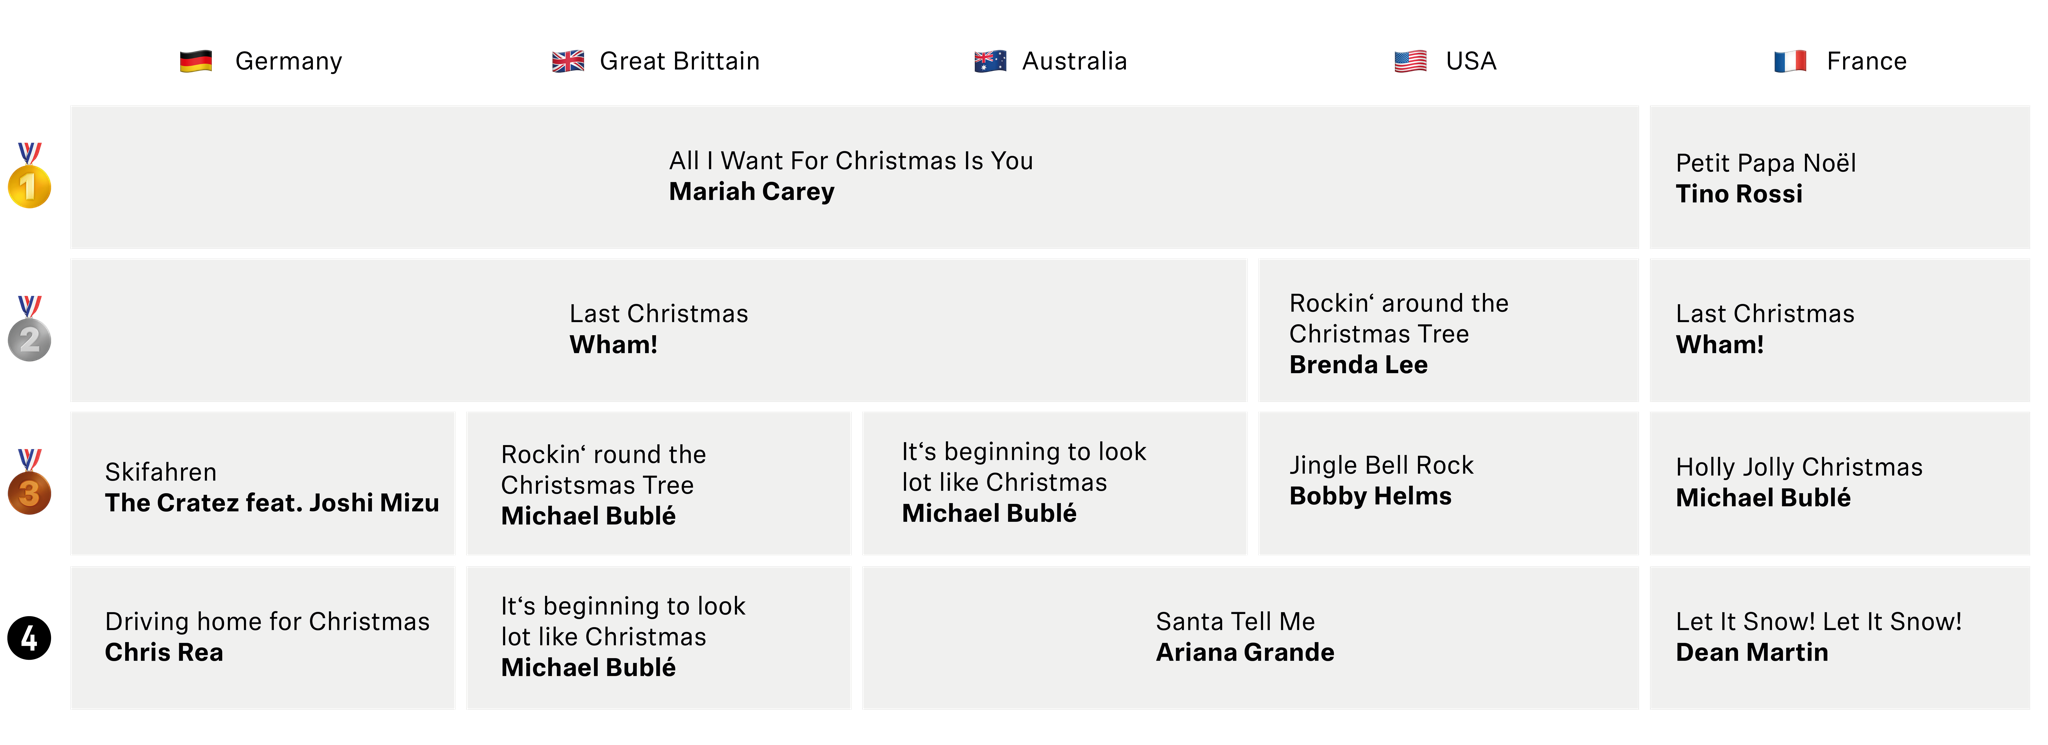 The top 4 Christmas songs on Spotify in 2019